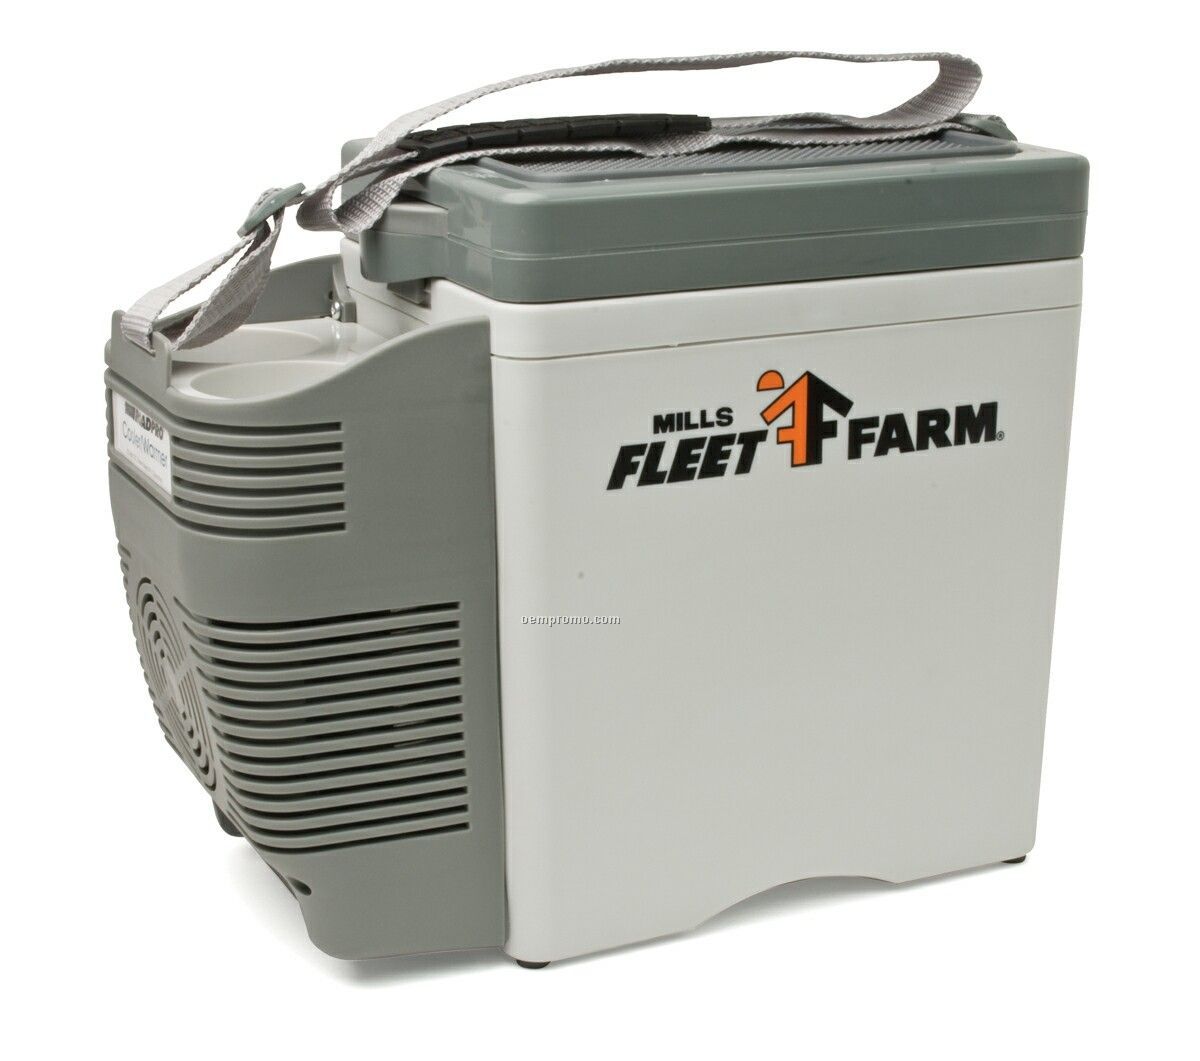 12 Volt 7 Liter Cooler / Warmer With Cup Holders